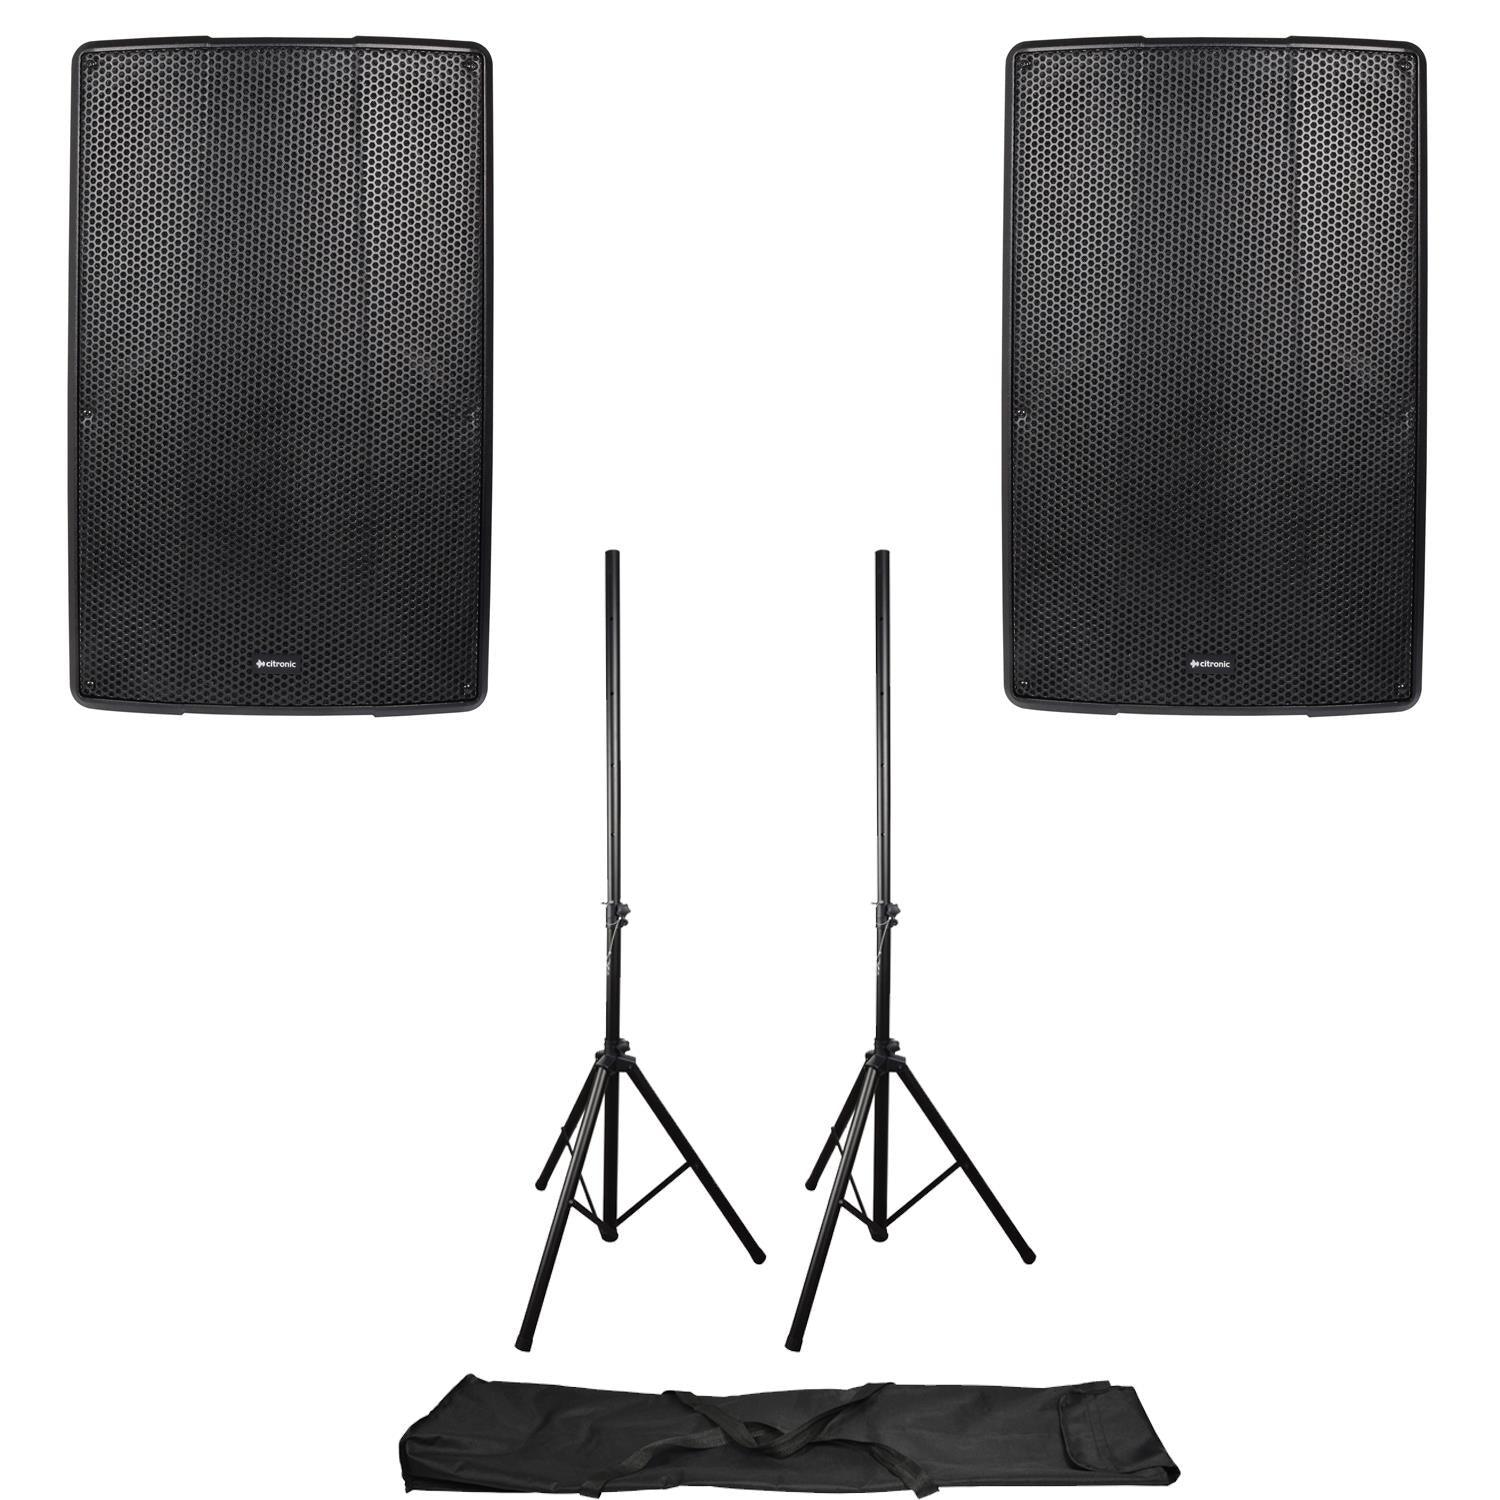 2 x Citronic CLARA-15A 15" 1000w Active HP Speaker Cabinet with Stands - DY Pro Audio